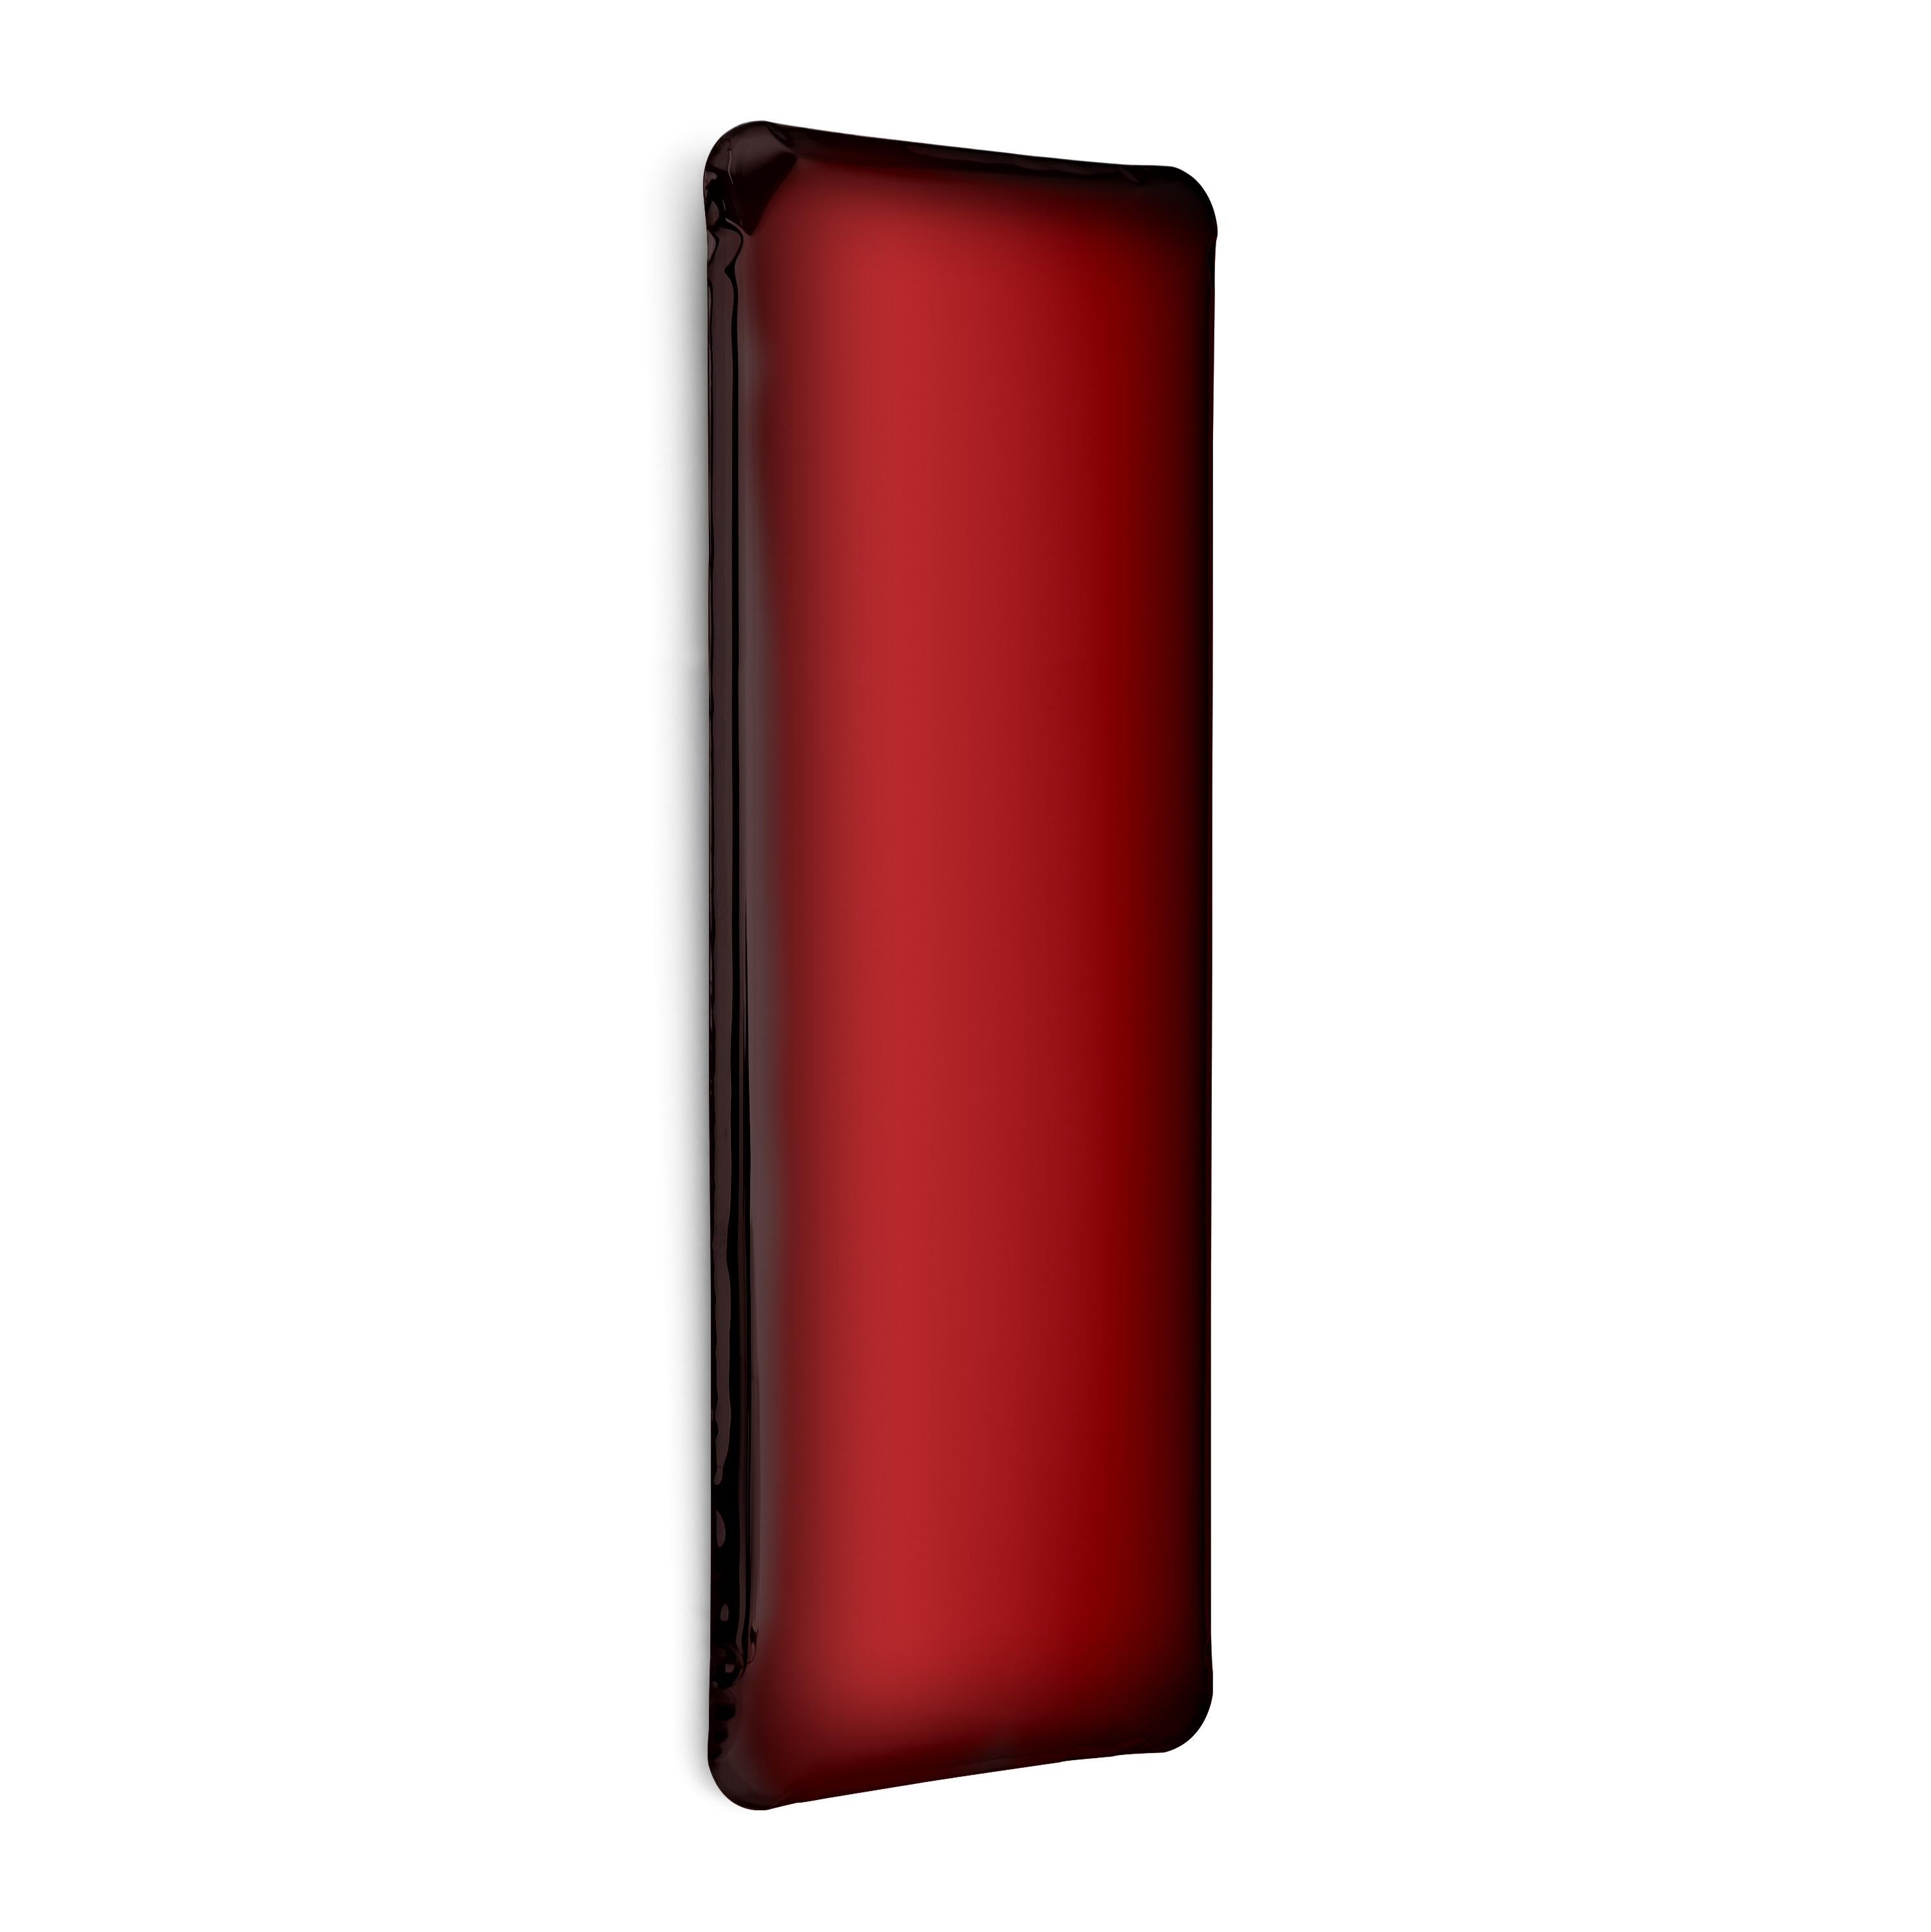 Contemporary Mirror 'Tafla Q2' by Zieta, Transitions, Red Rubin In New Condition For Sale In Paris, FR